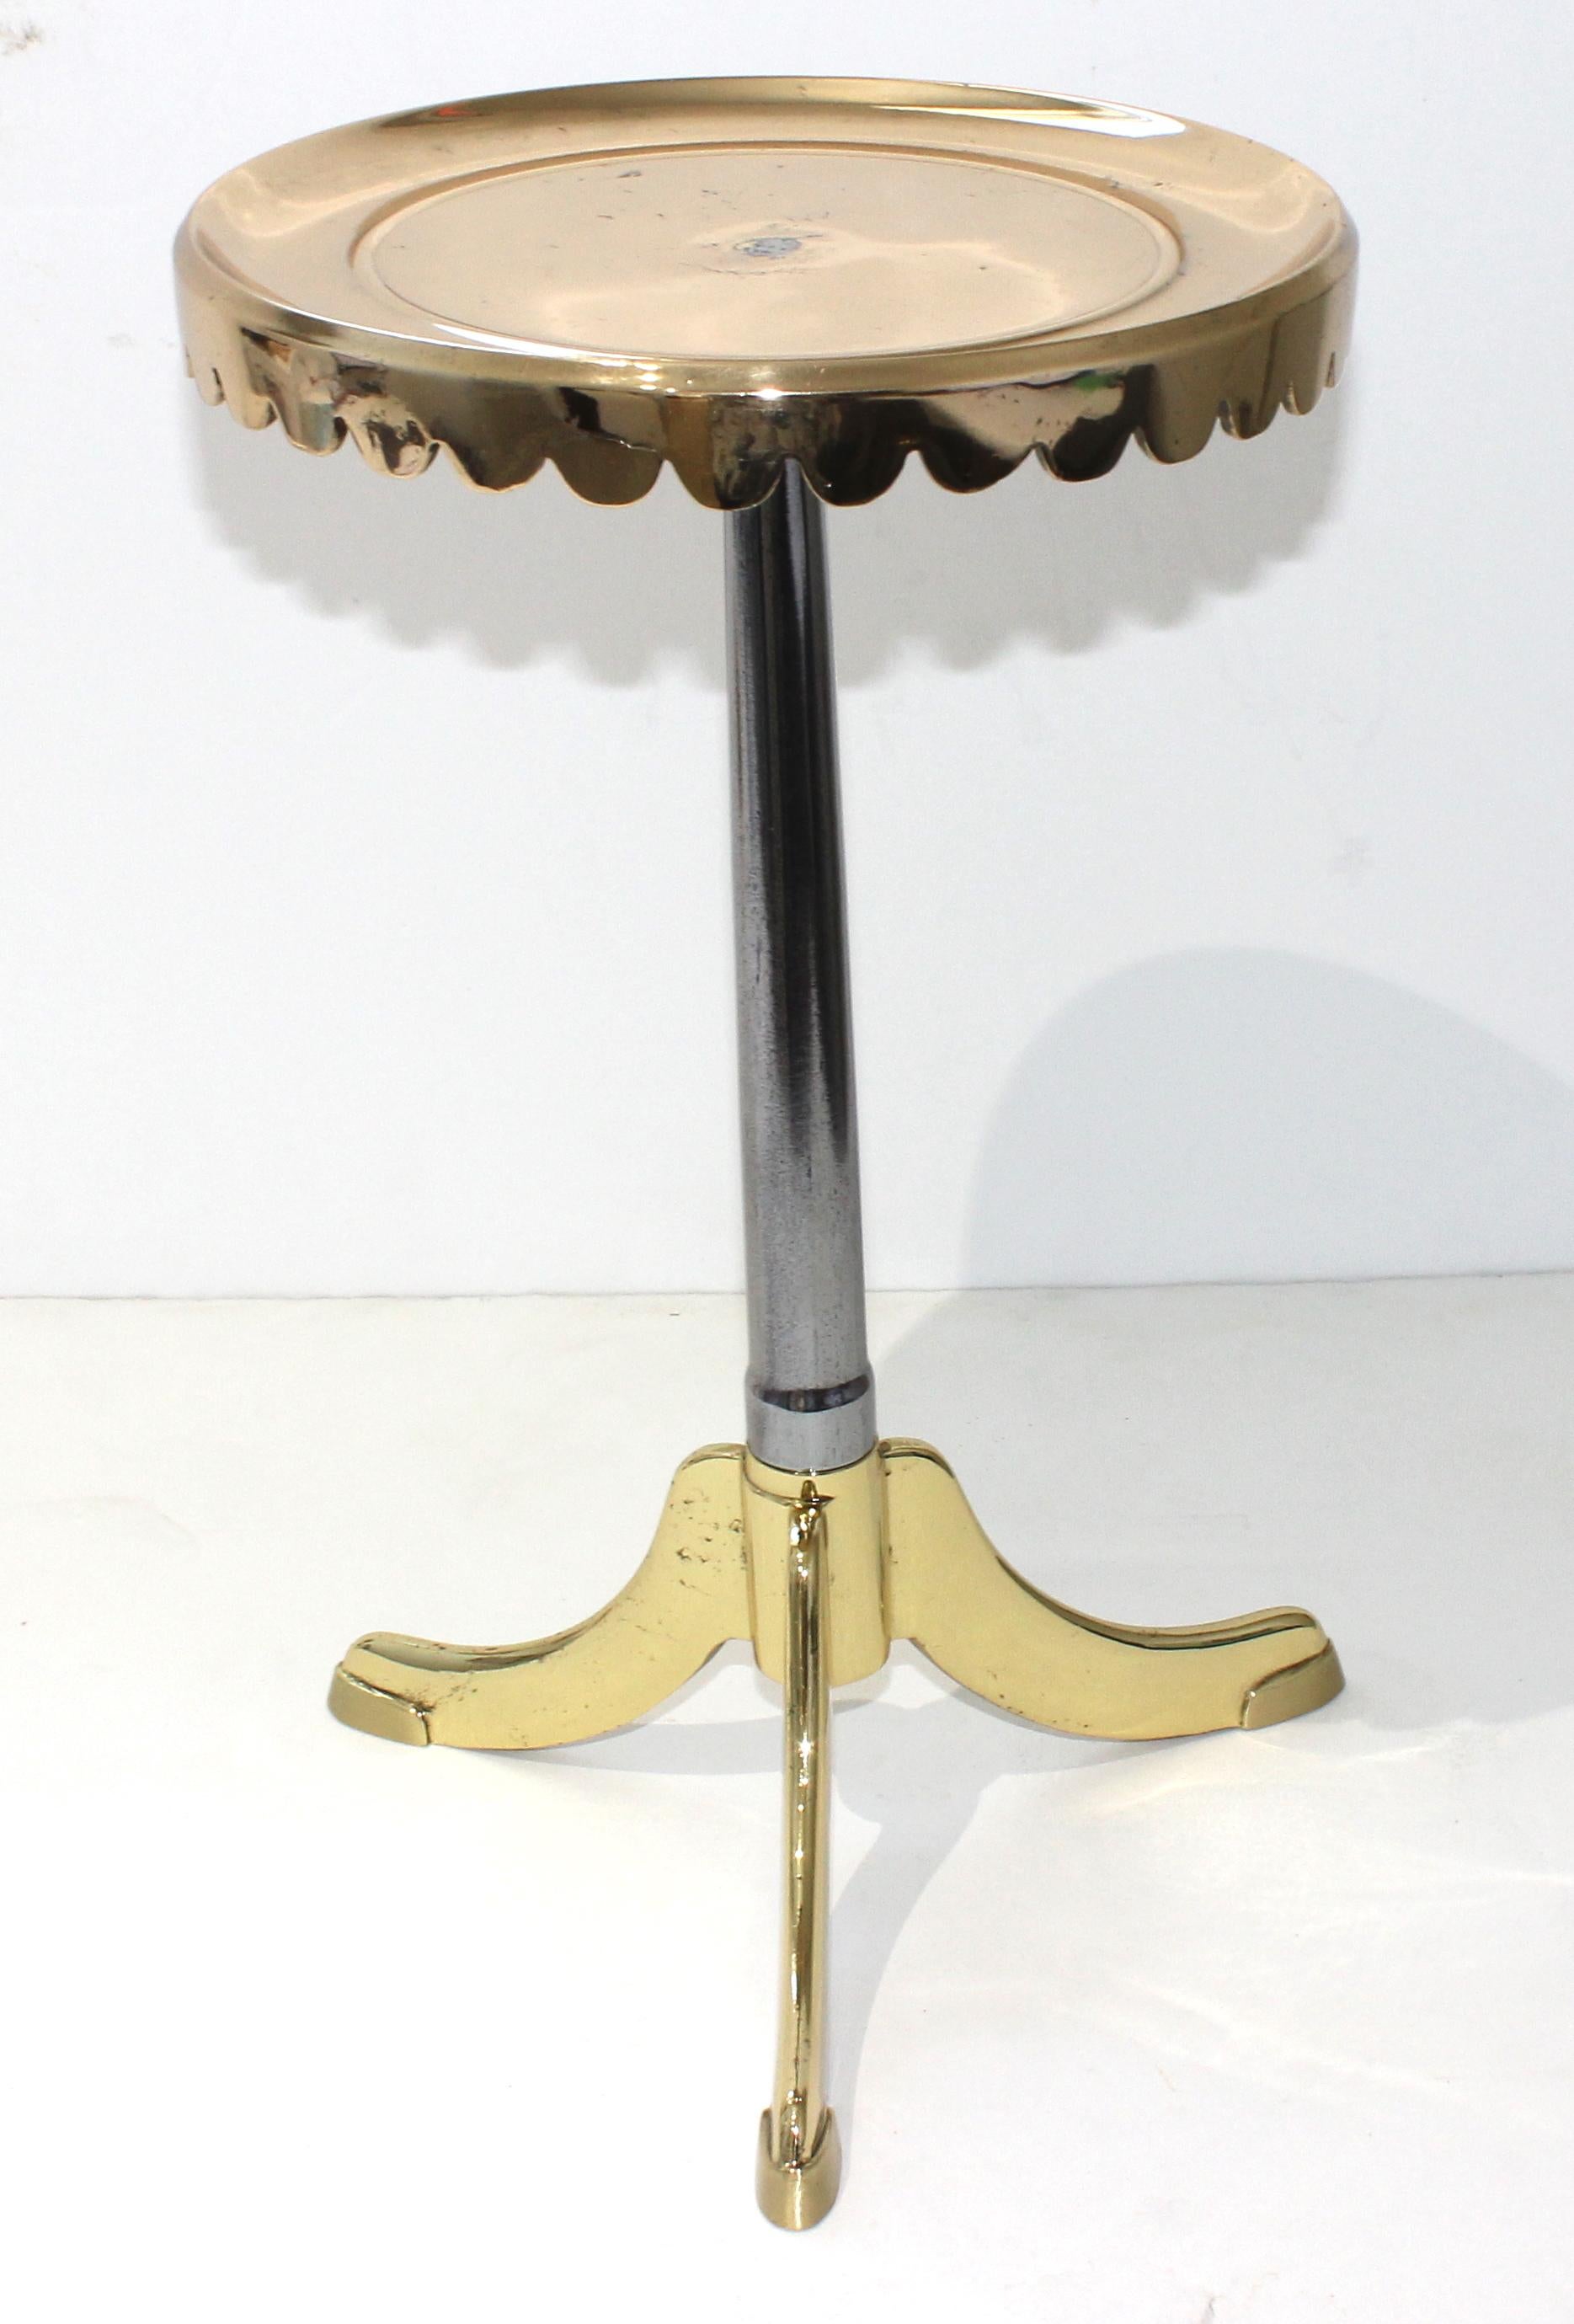 This Italian artisan side table dates to the 18th century, and is fabricated in hand-forged brass and steel.

Note: The piece has been professionally polished and lacquered (thus no tarnishing).

Note: The piece has polished and satin